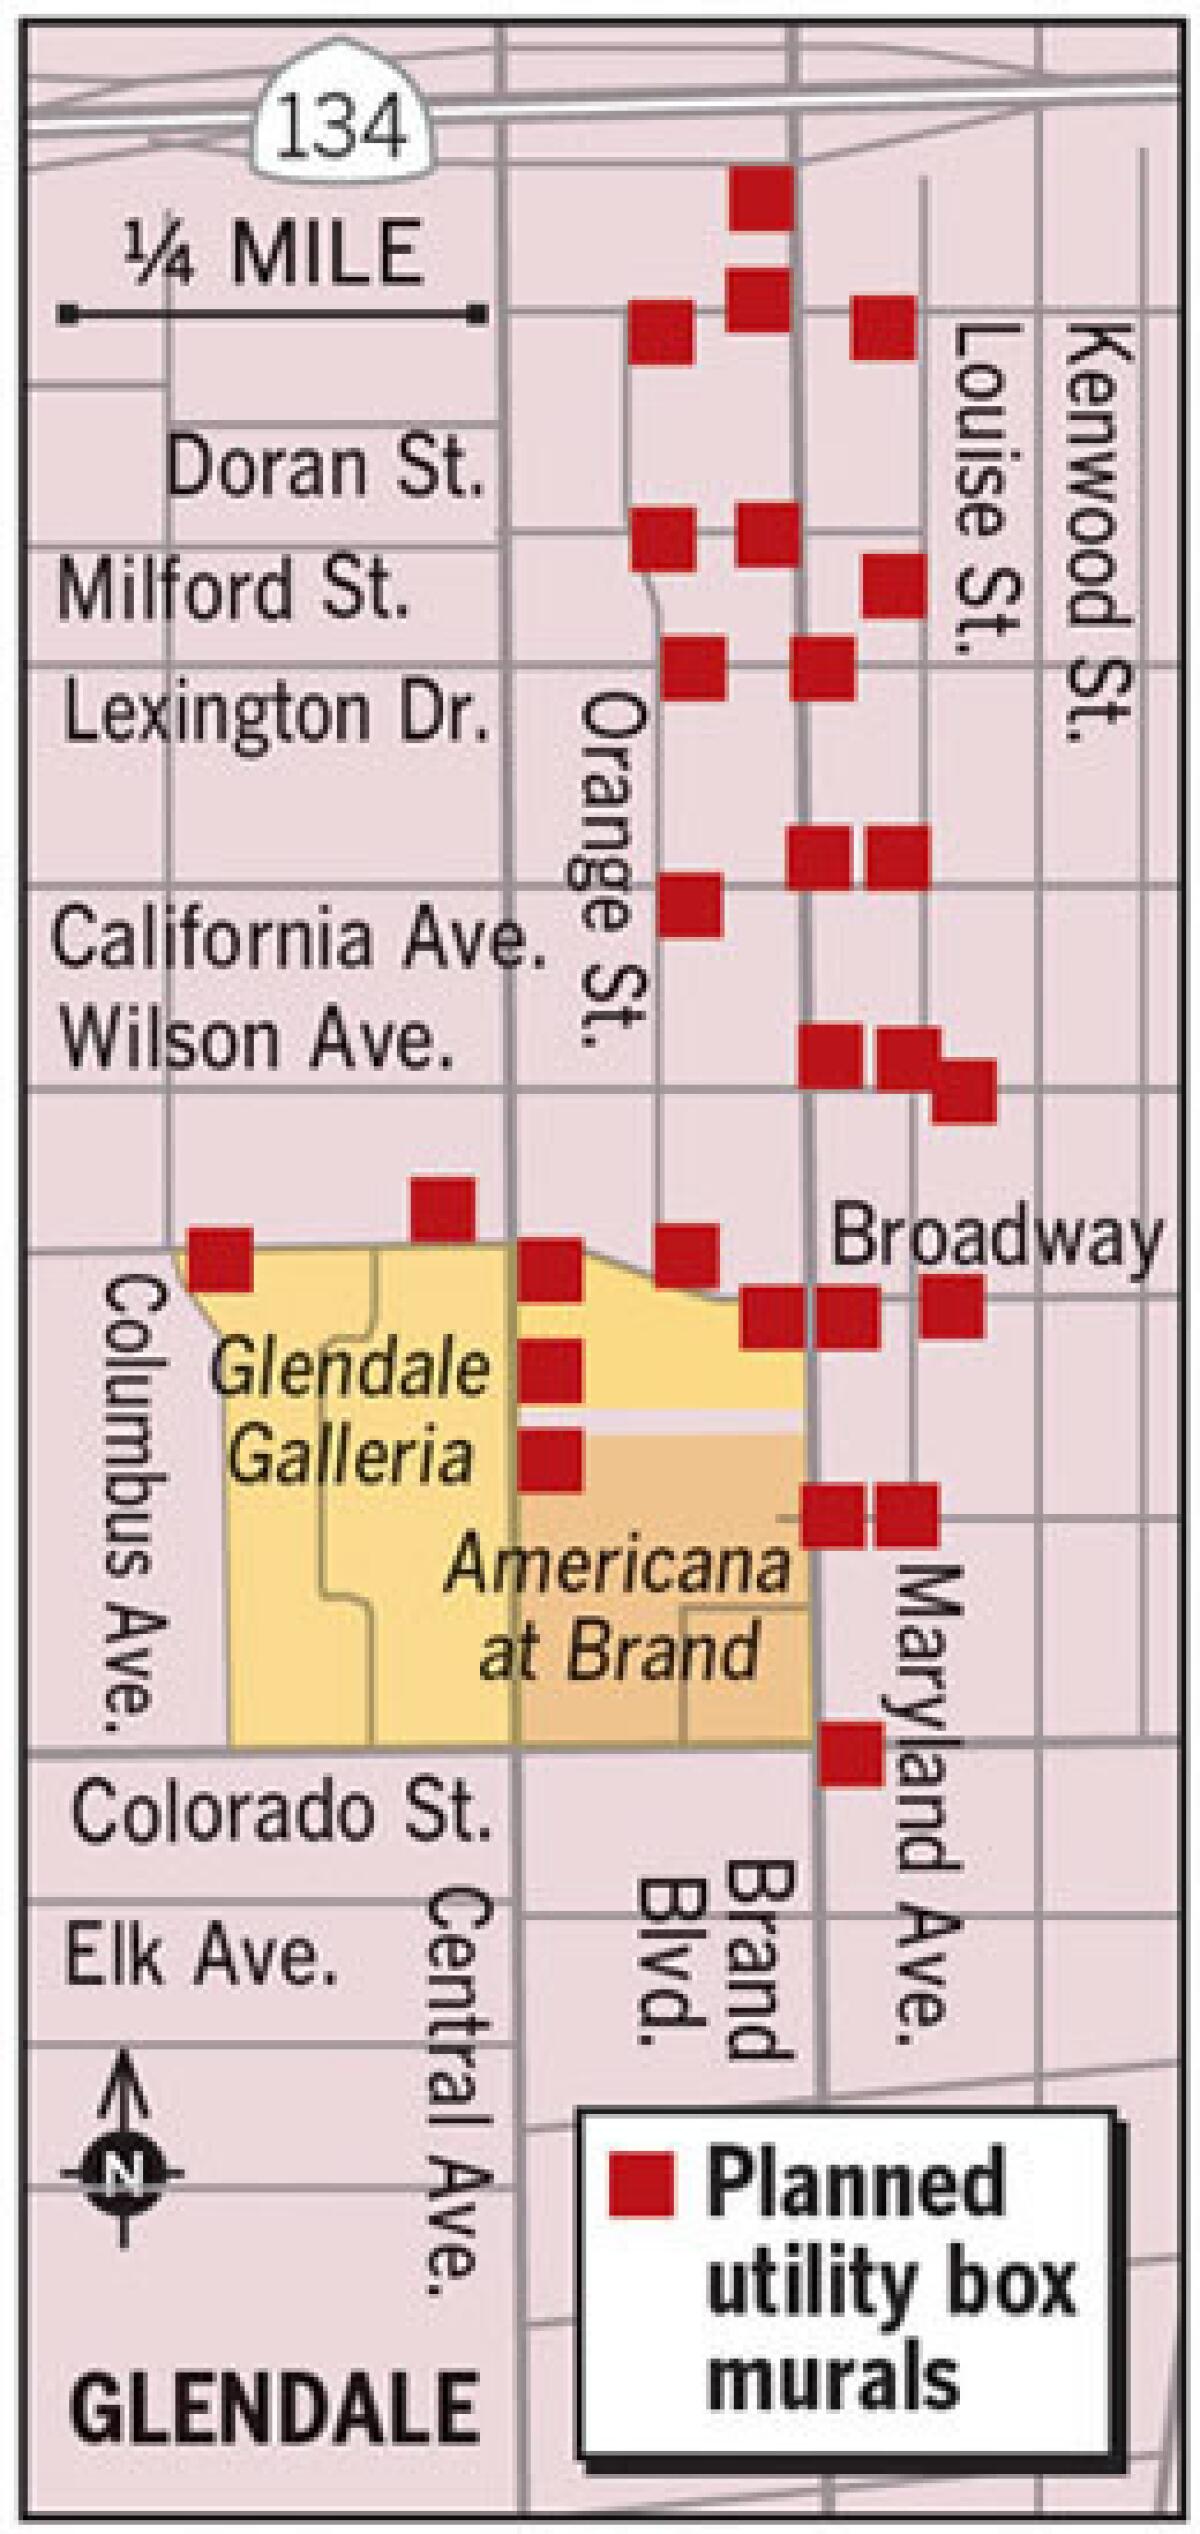 Indicated on the map are the planned locations for murals to be painted on utility boxes throughout Glendale. The city recently put out a request to artists to submit their designs.